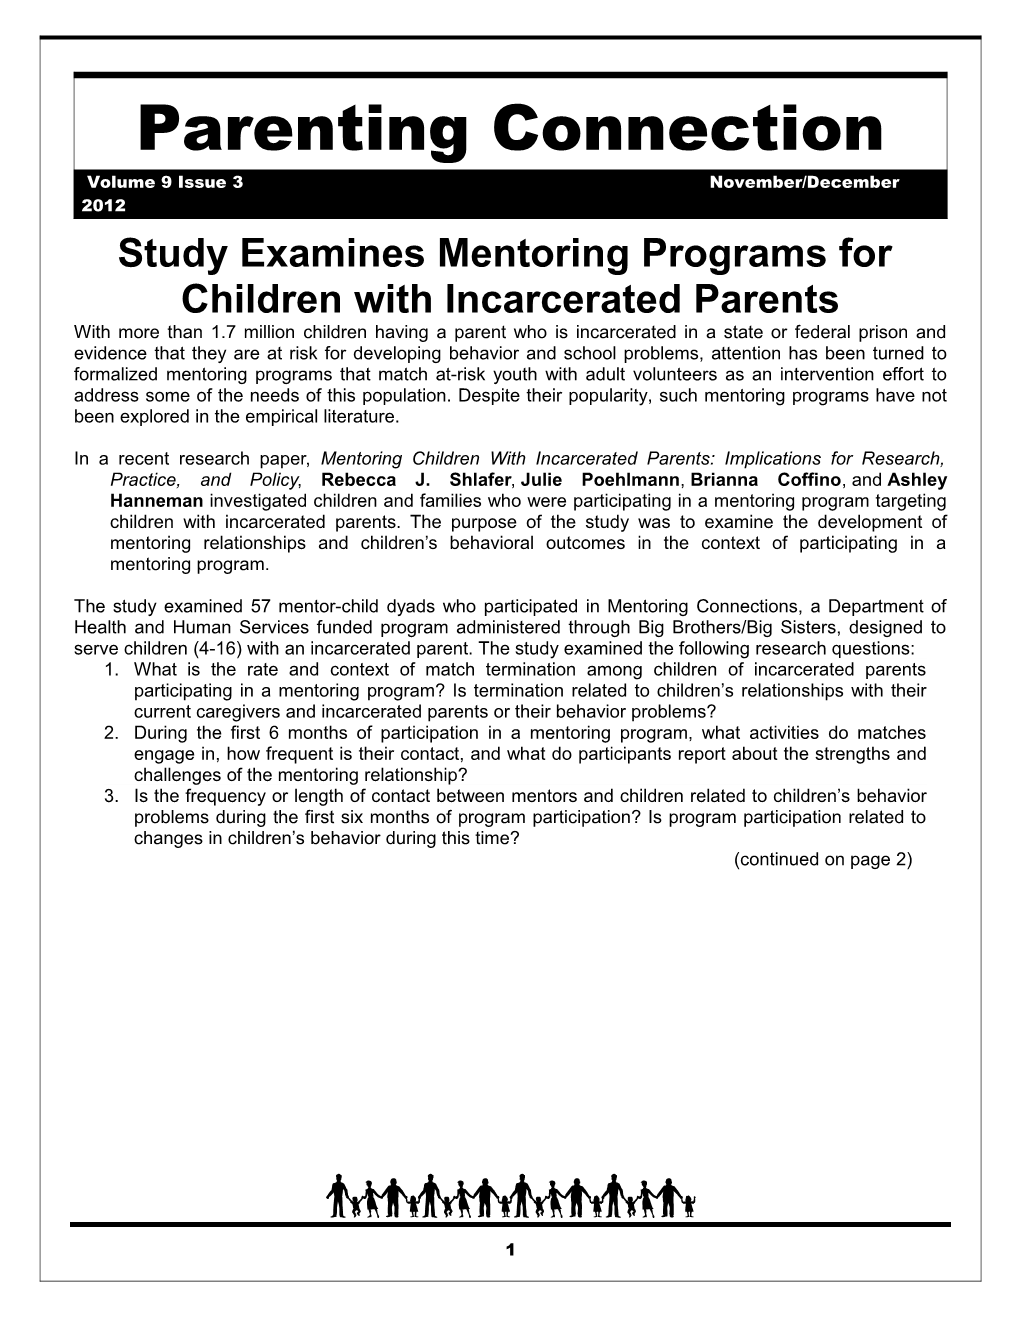 Study Examines Mentoring Programs For